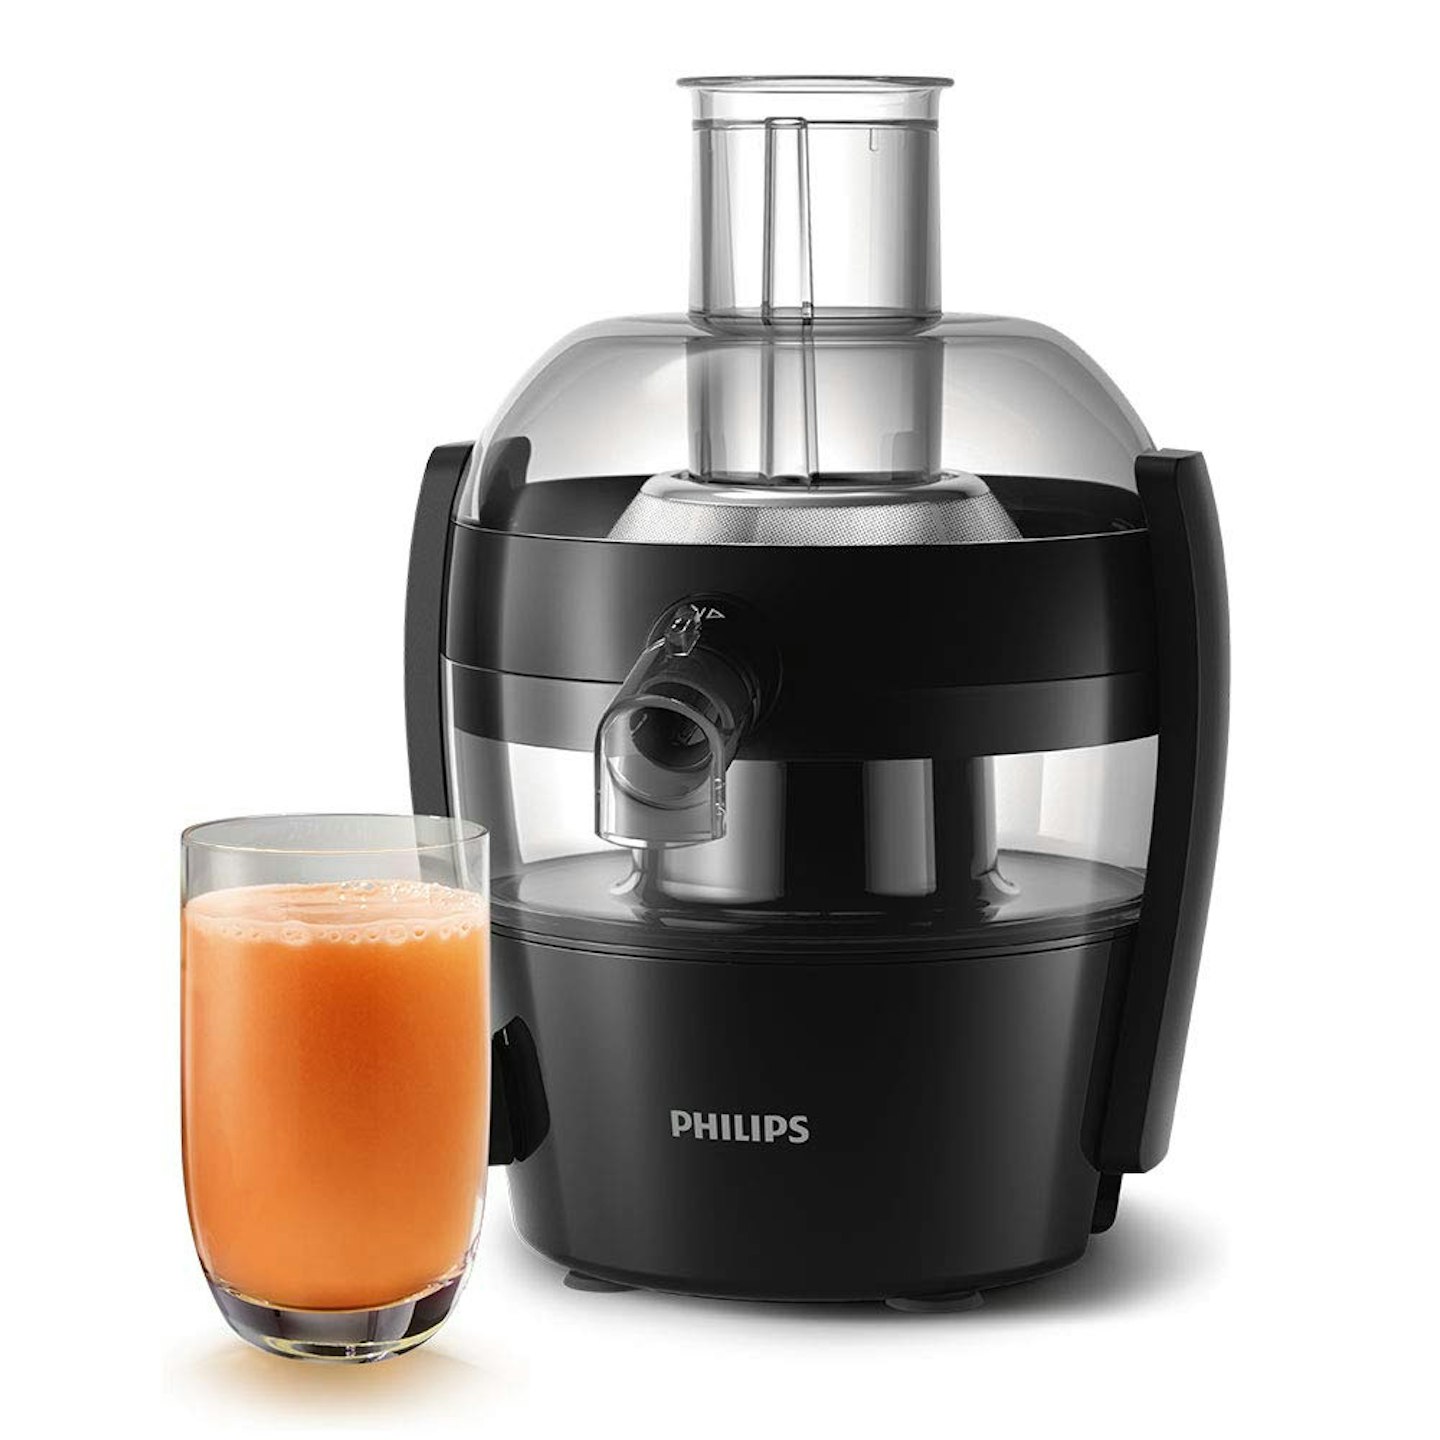 Philips HR1832/01 Viva Collection Compact Juicer, £69.99